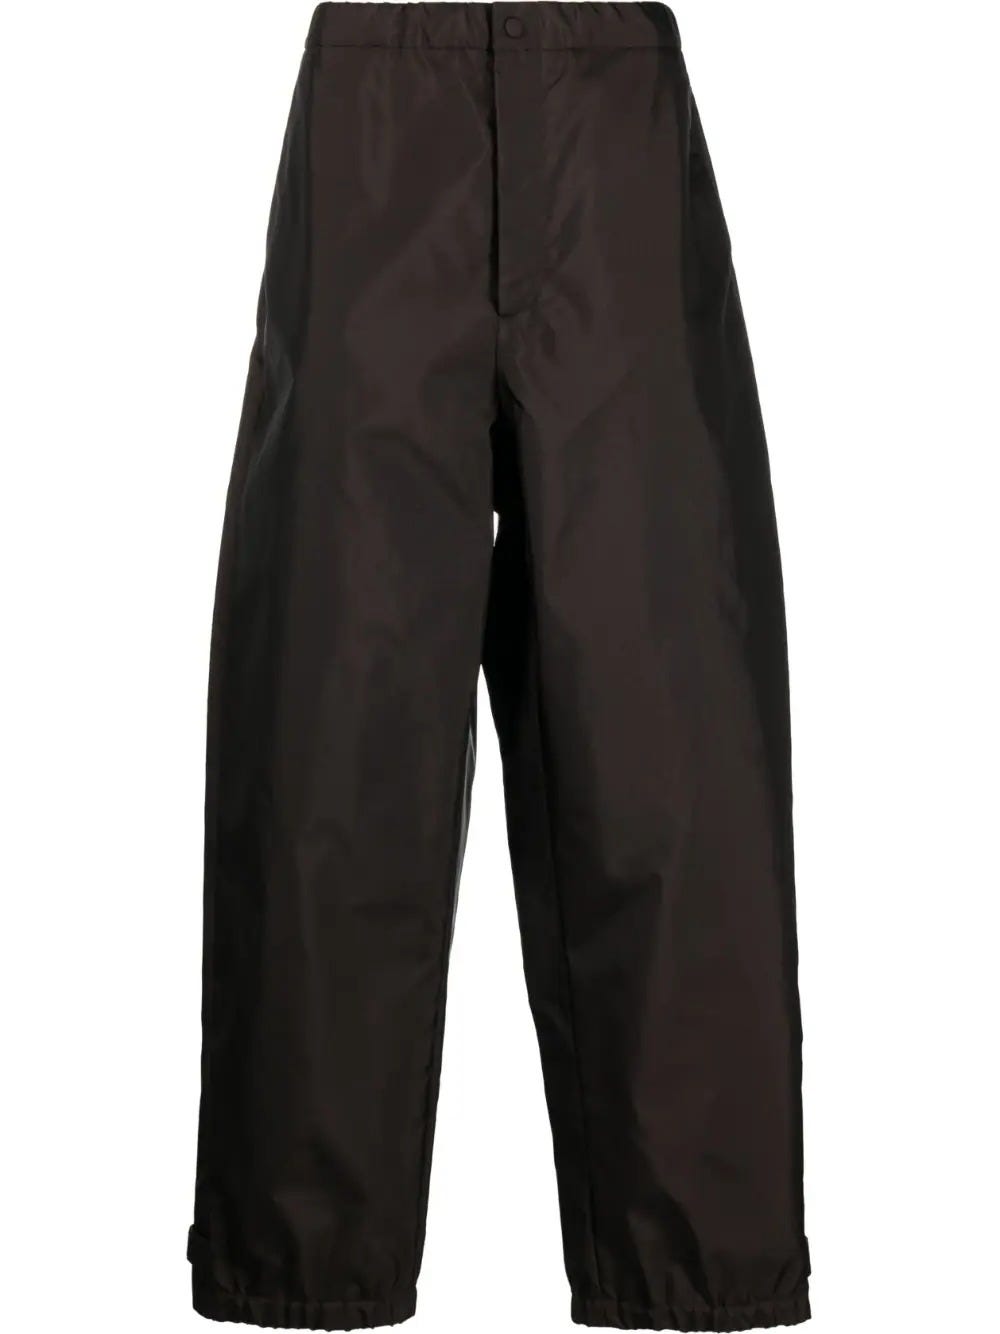 VALENTINO VALENTINO BROWN WIDE HIGH-WAISTED PANTS